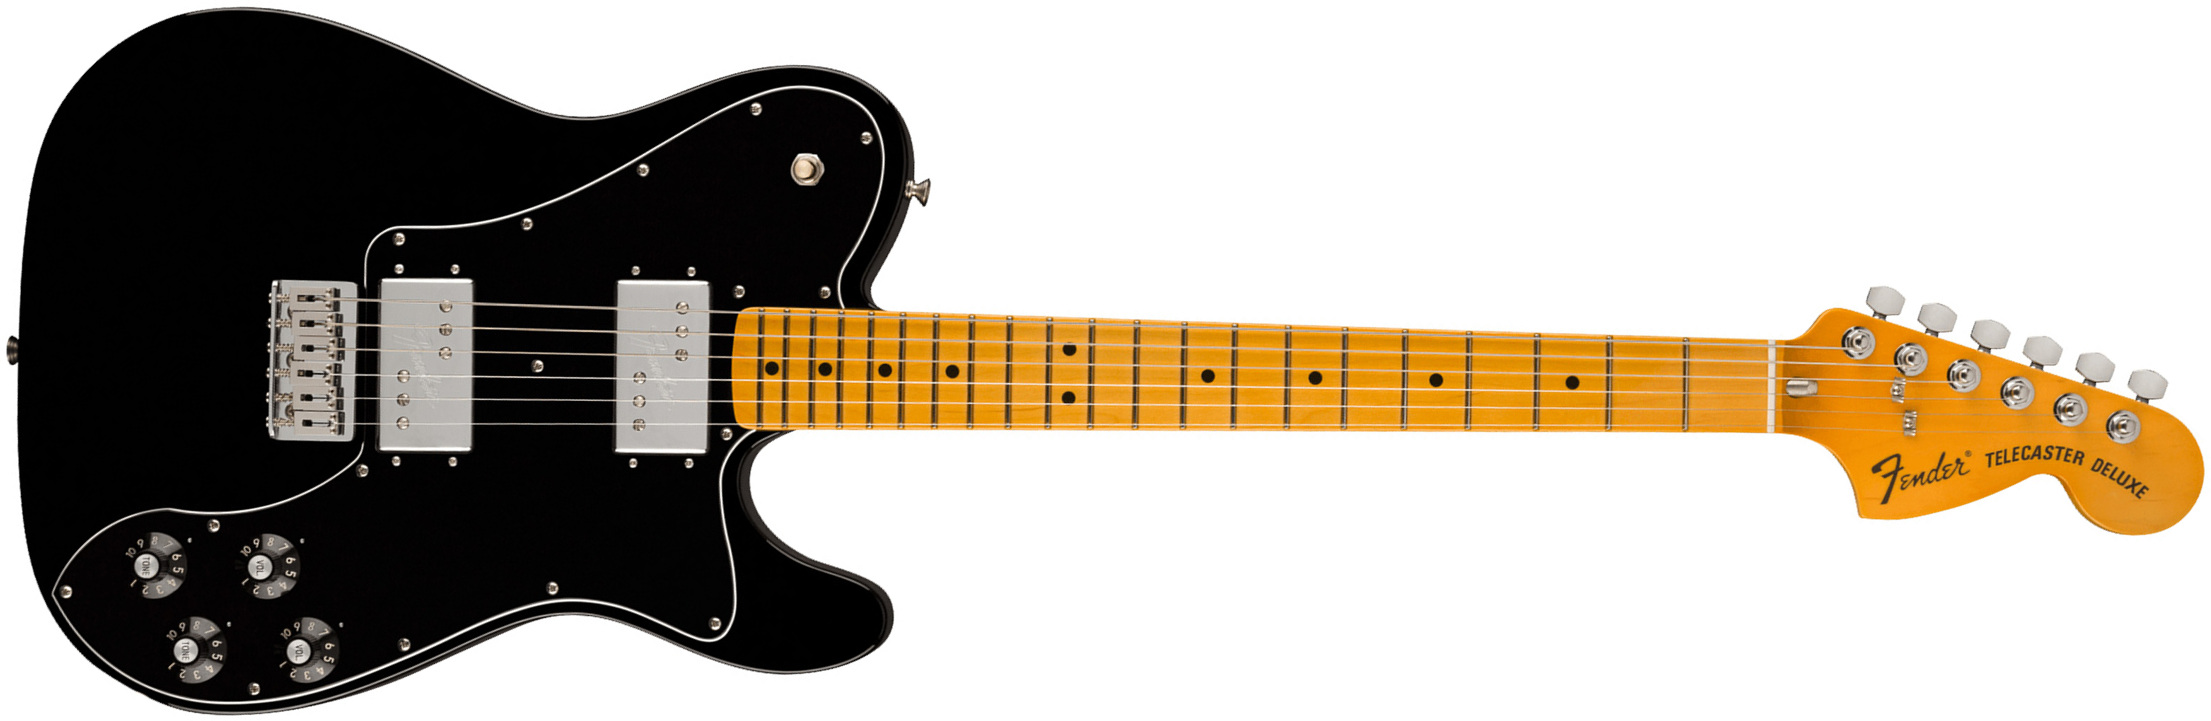 Fender Tele Deluxe 1975 American Vintage Ii Usa 2h Ht Mn - Black - Tel shape electric guitar - Main picture